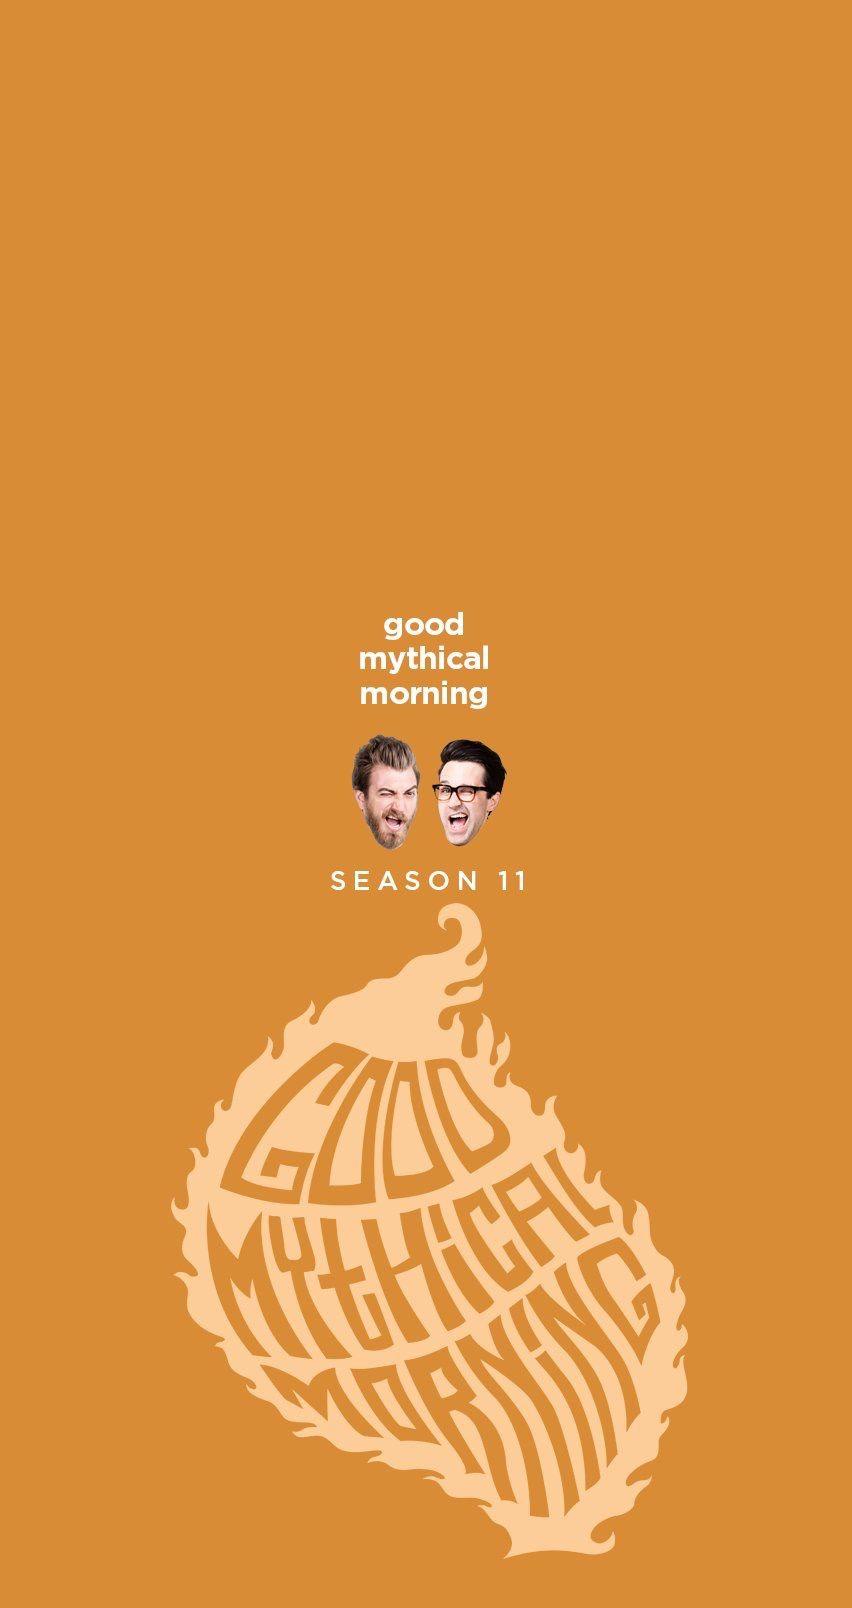 GMM iPhone background. Good Mythical Morning. Good mythical